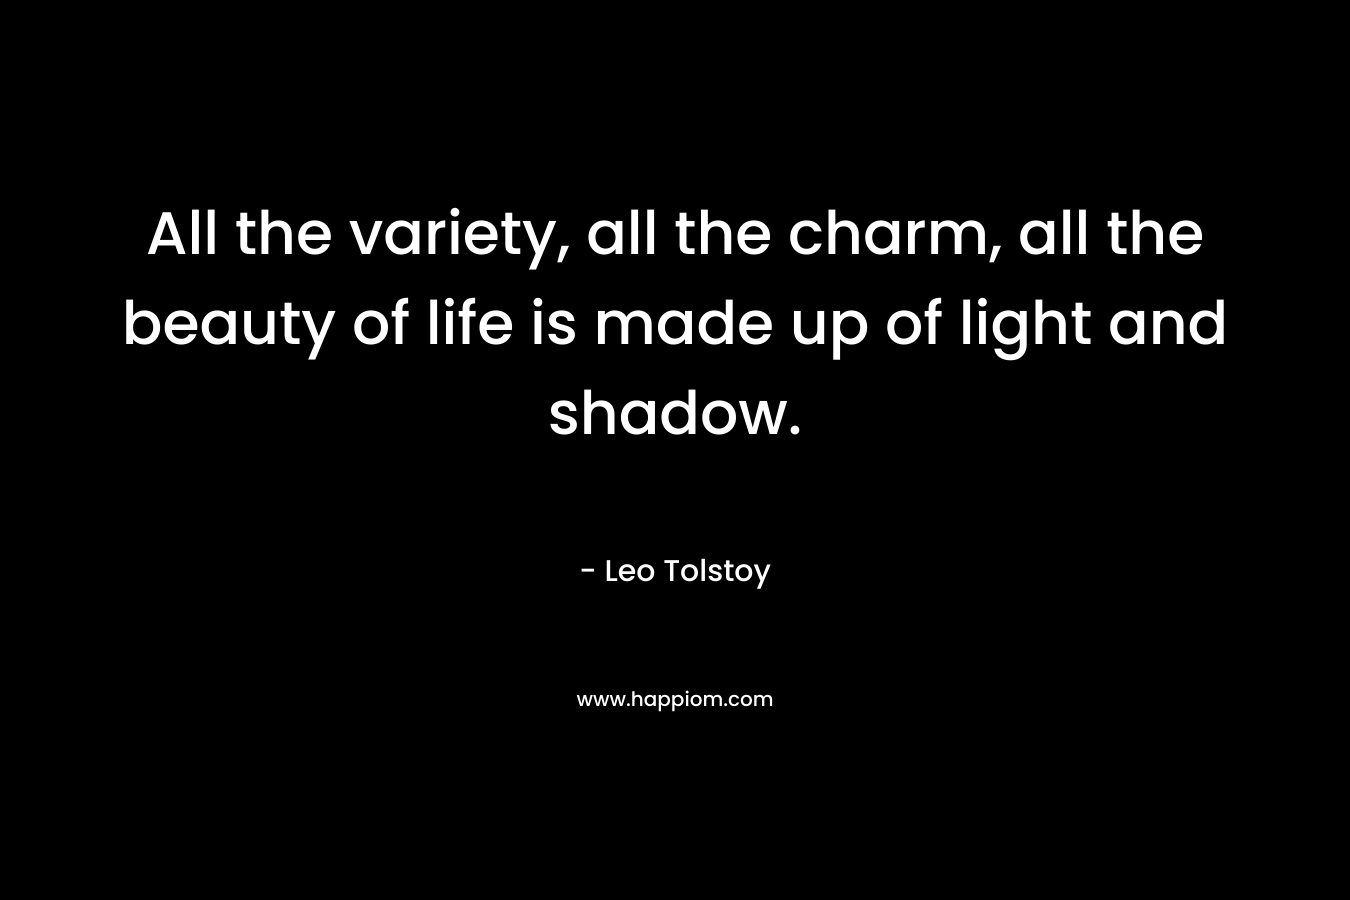 All the variety, all the charm, all the beauty of life is made up of light and shadow. – Leo Tolstoy